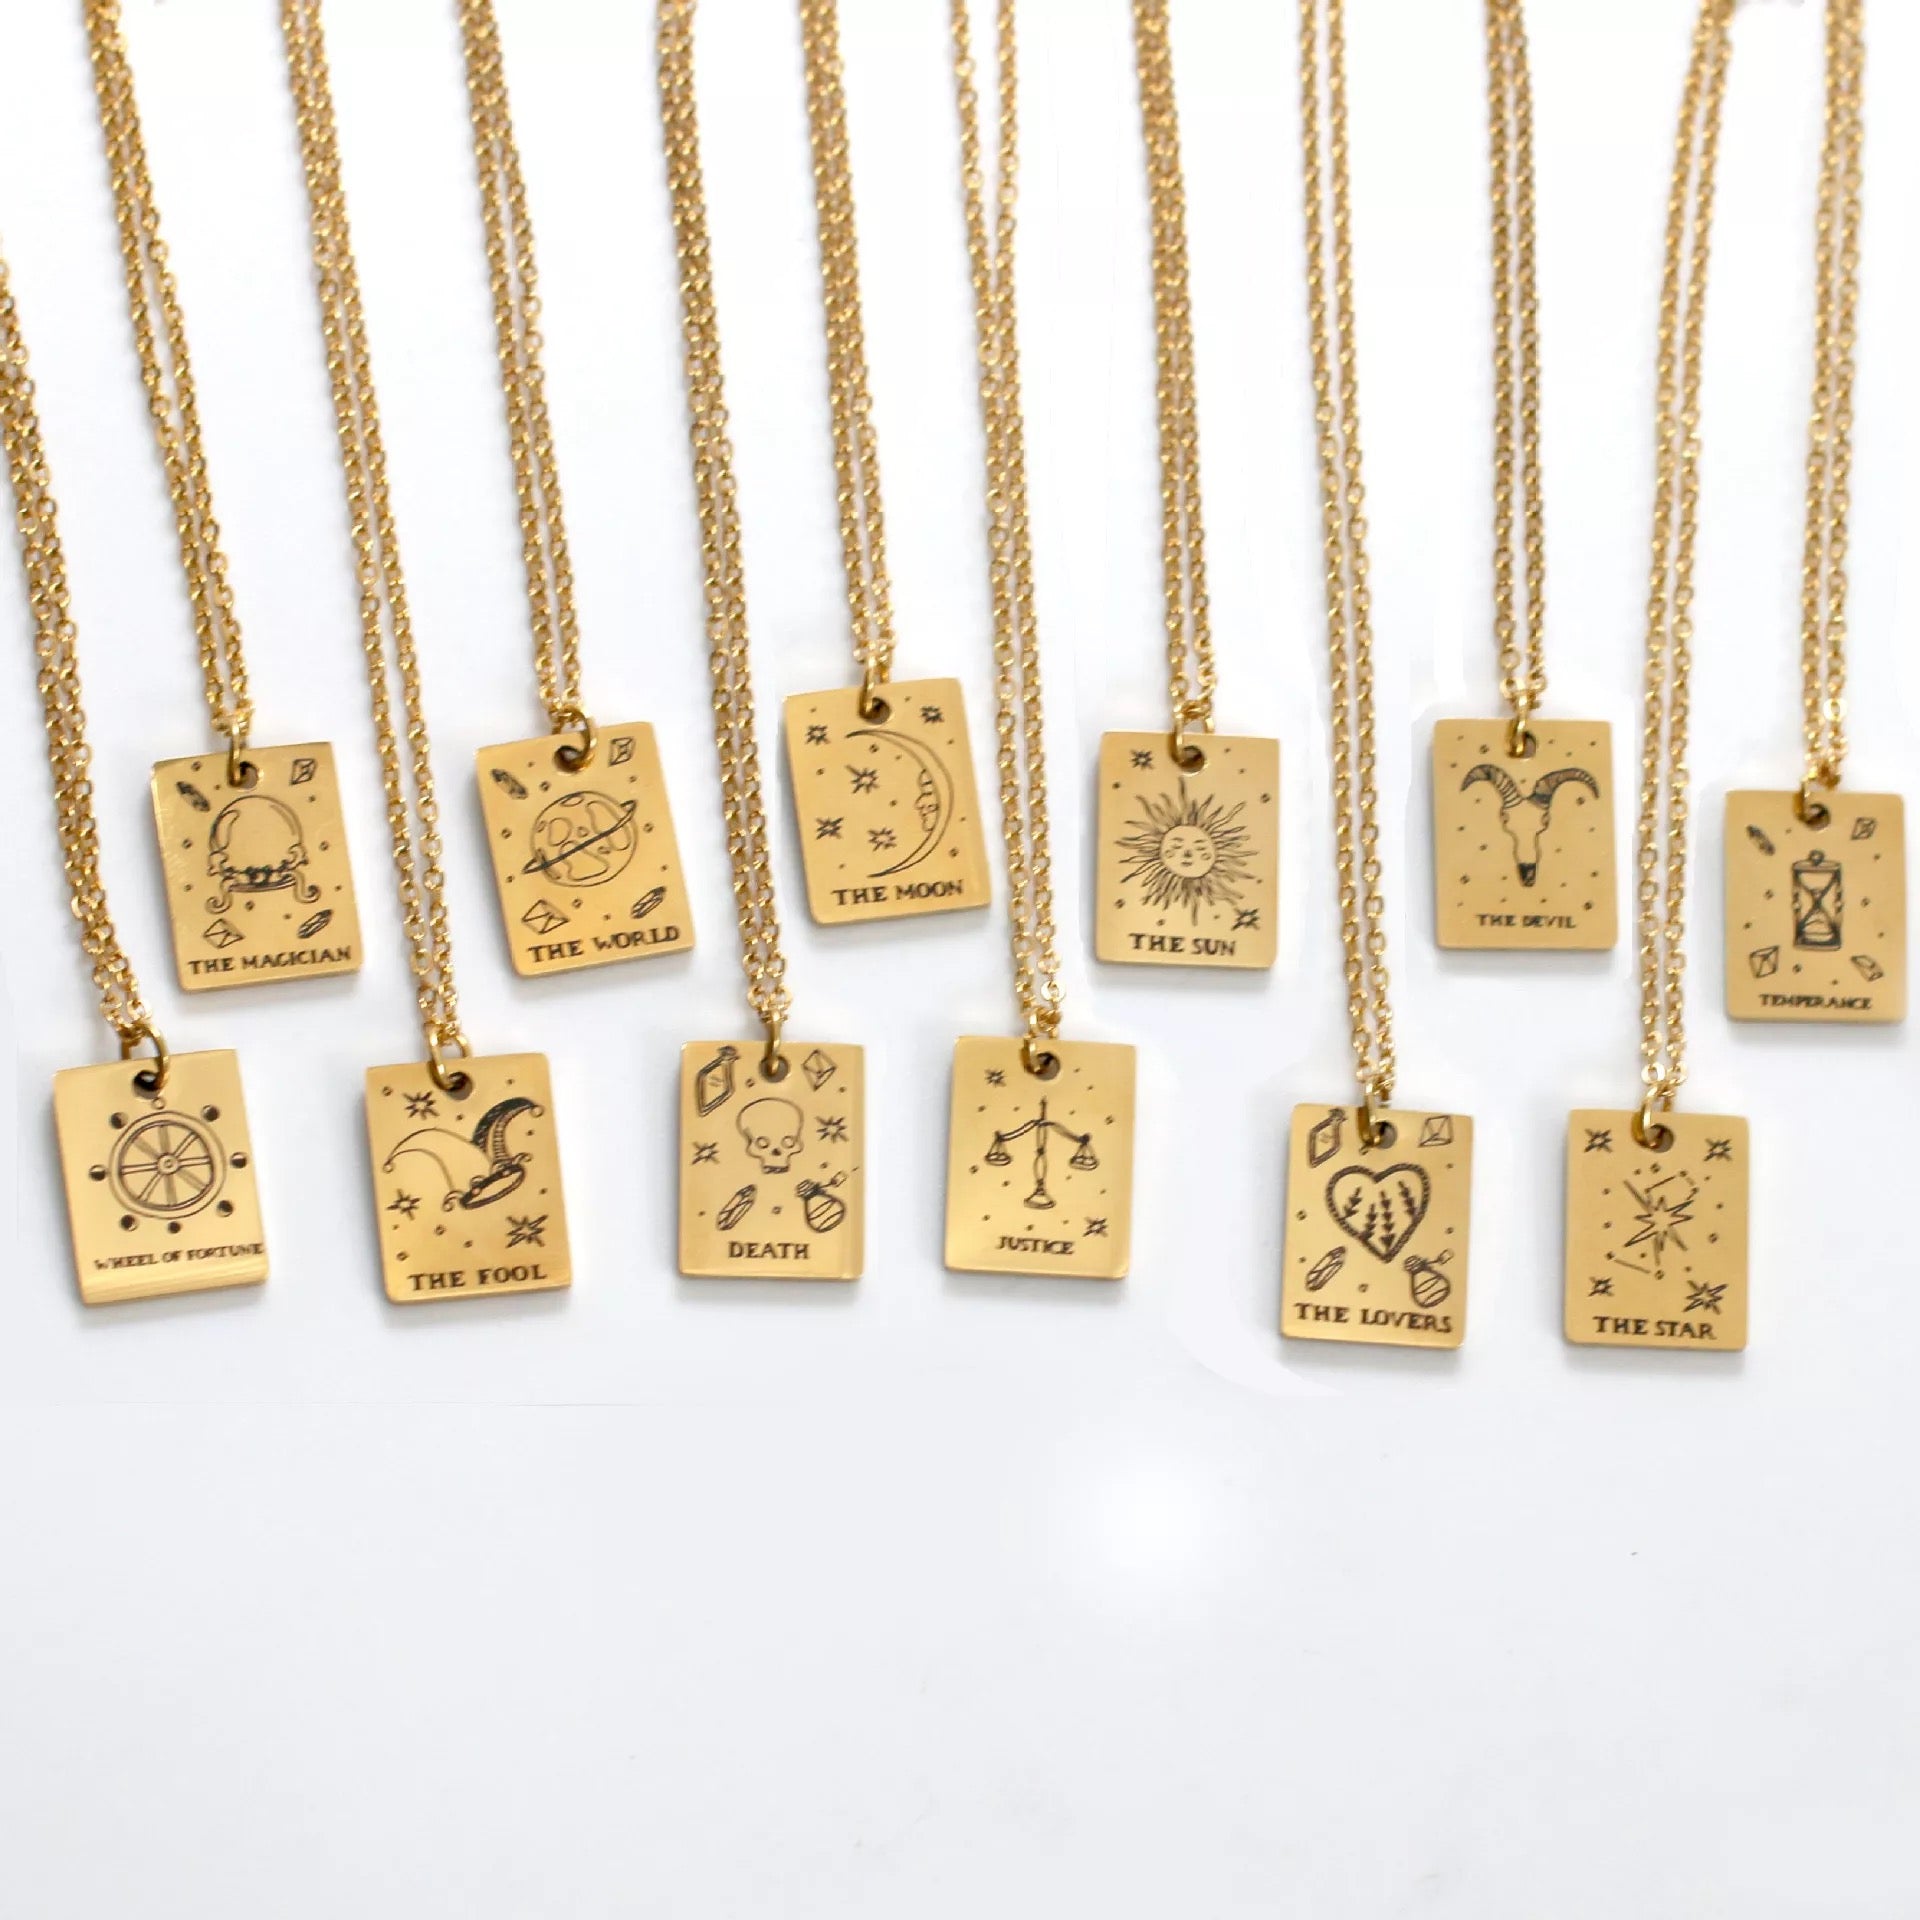 The world Tarot card gold necklace - Unisex gold plated metaphysical necklace